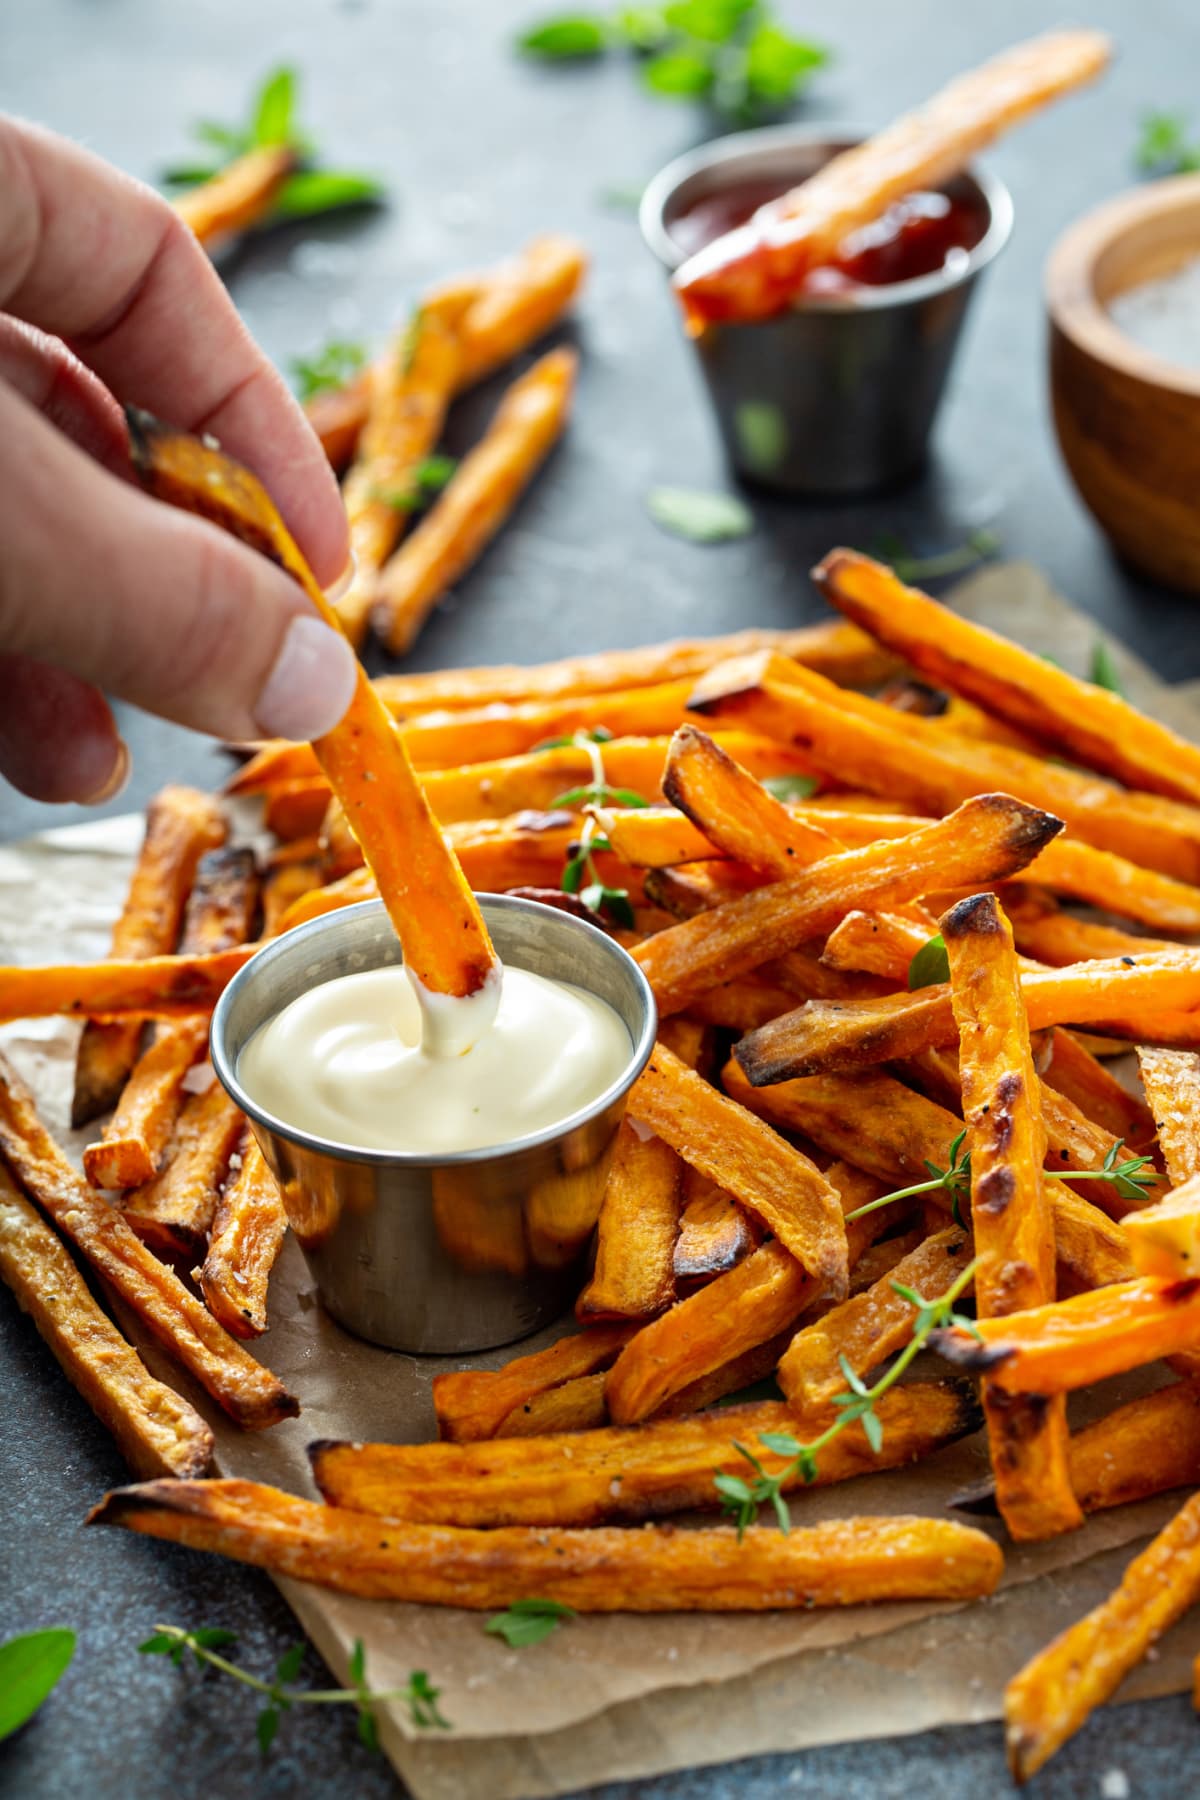 Sweet potato fries with mayo and ketchup and one held in hand being dipped